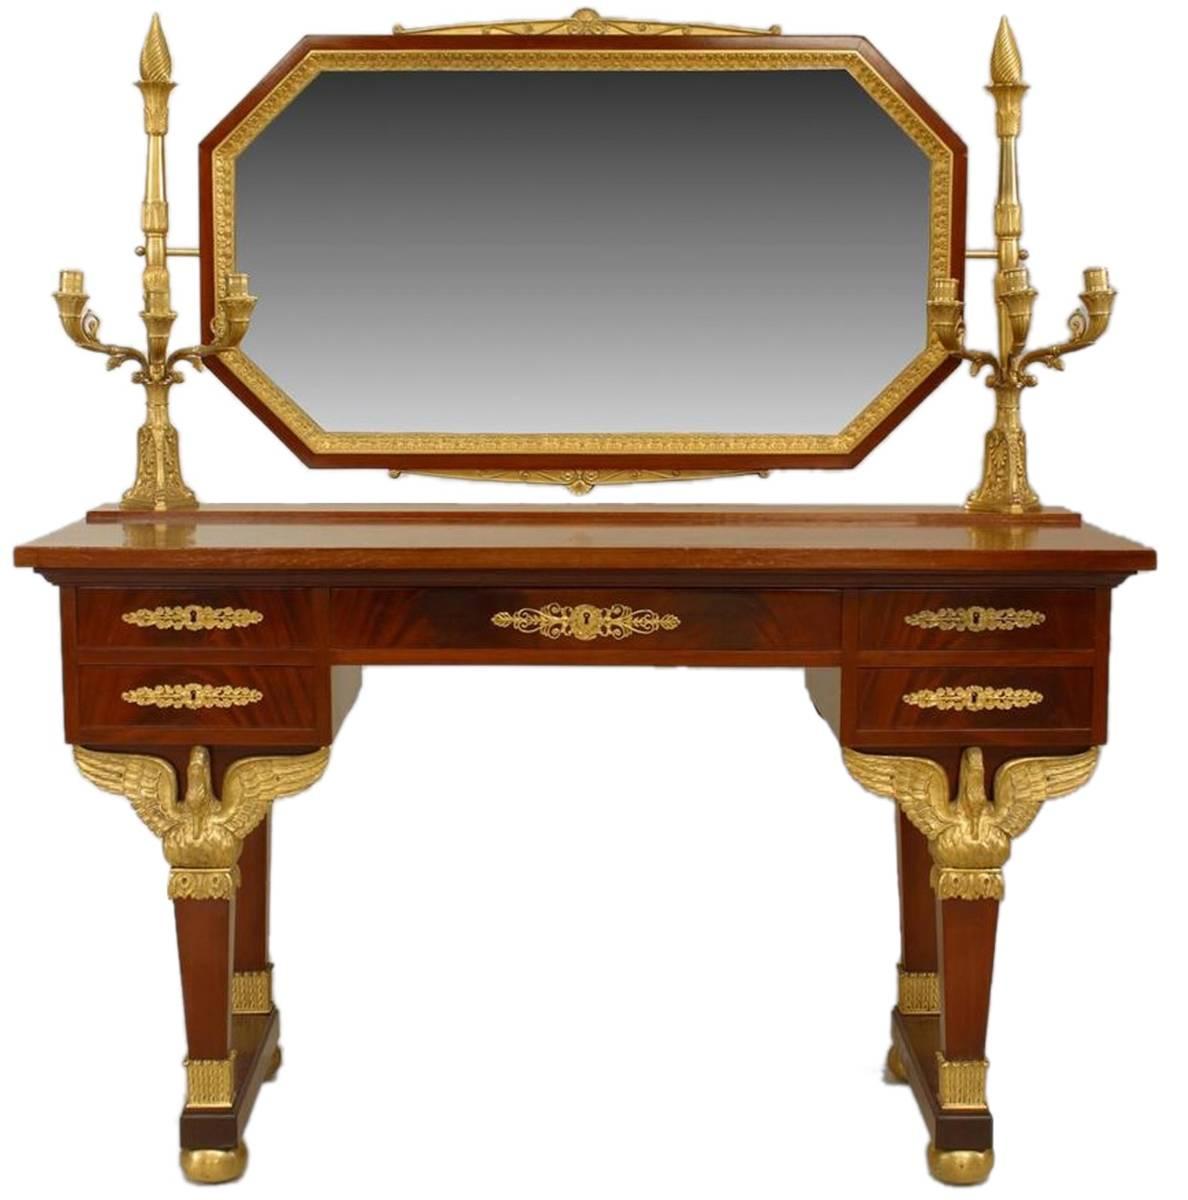 From the third quarter of the 19th century, a Second Empire lady's dressing table with elegant gilt bronze swan supports mounted to legs, octagonal shaped tilting mirror and three arm candelabras at each end. Four drawers, two presumably for